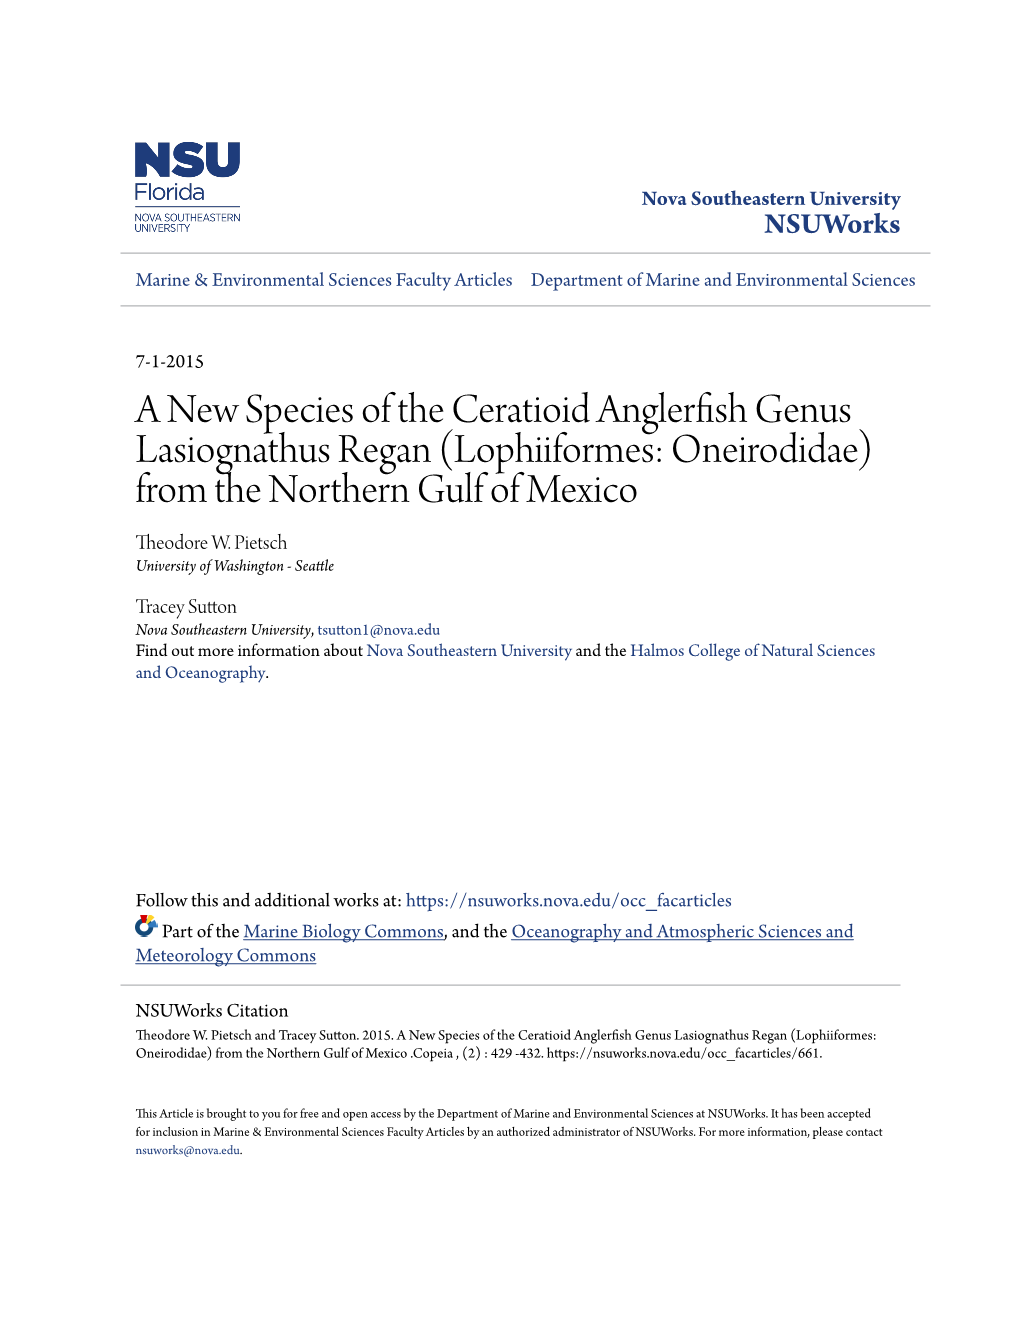 A New Species of the Ceratioid Anglerfish Genus Lasiognathus Regan (Lophiiformes: Oneirodidae) from the Northern Gulf of Mexico Theodore W